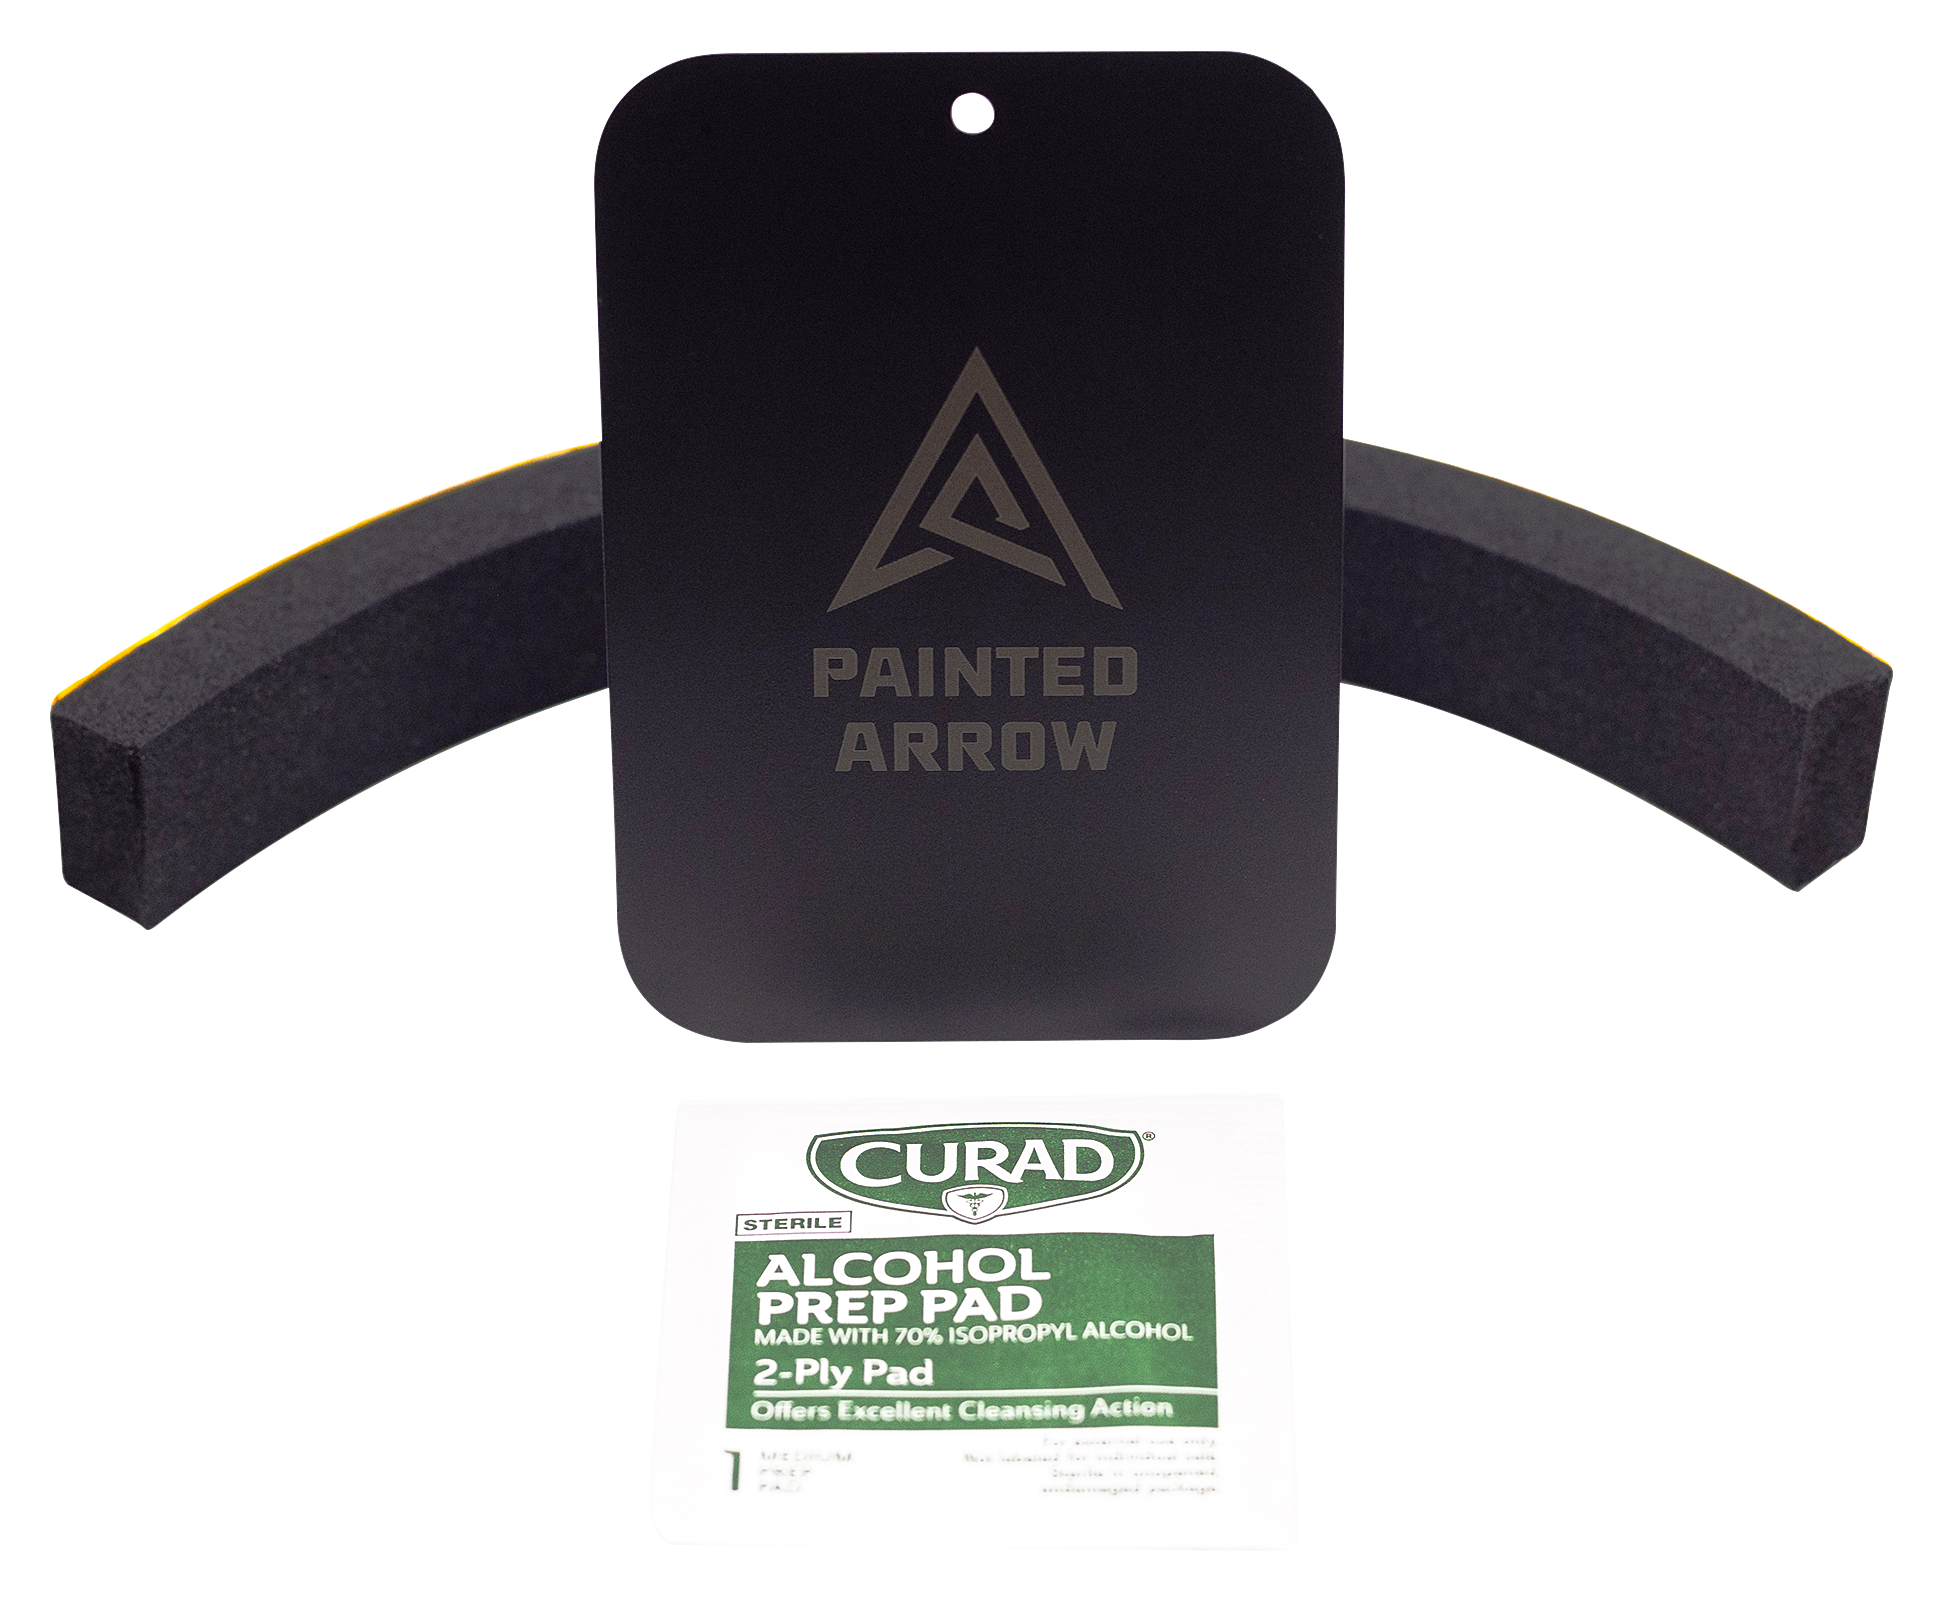 Painted Arrow MAG-PRO Smartphone Mount Accessory Kit